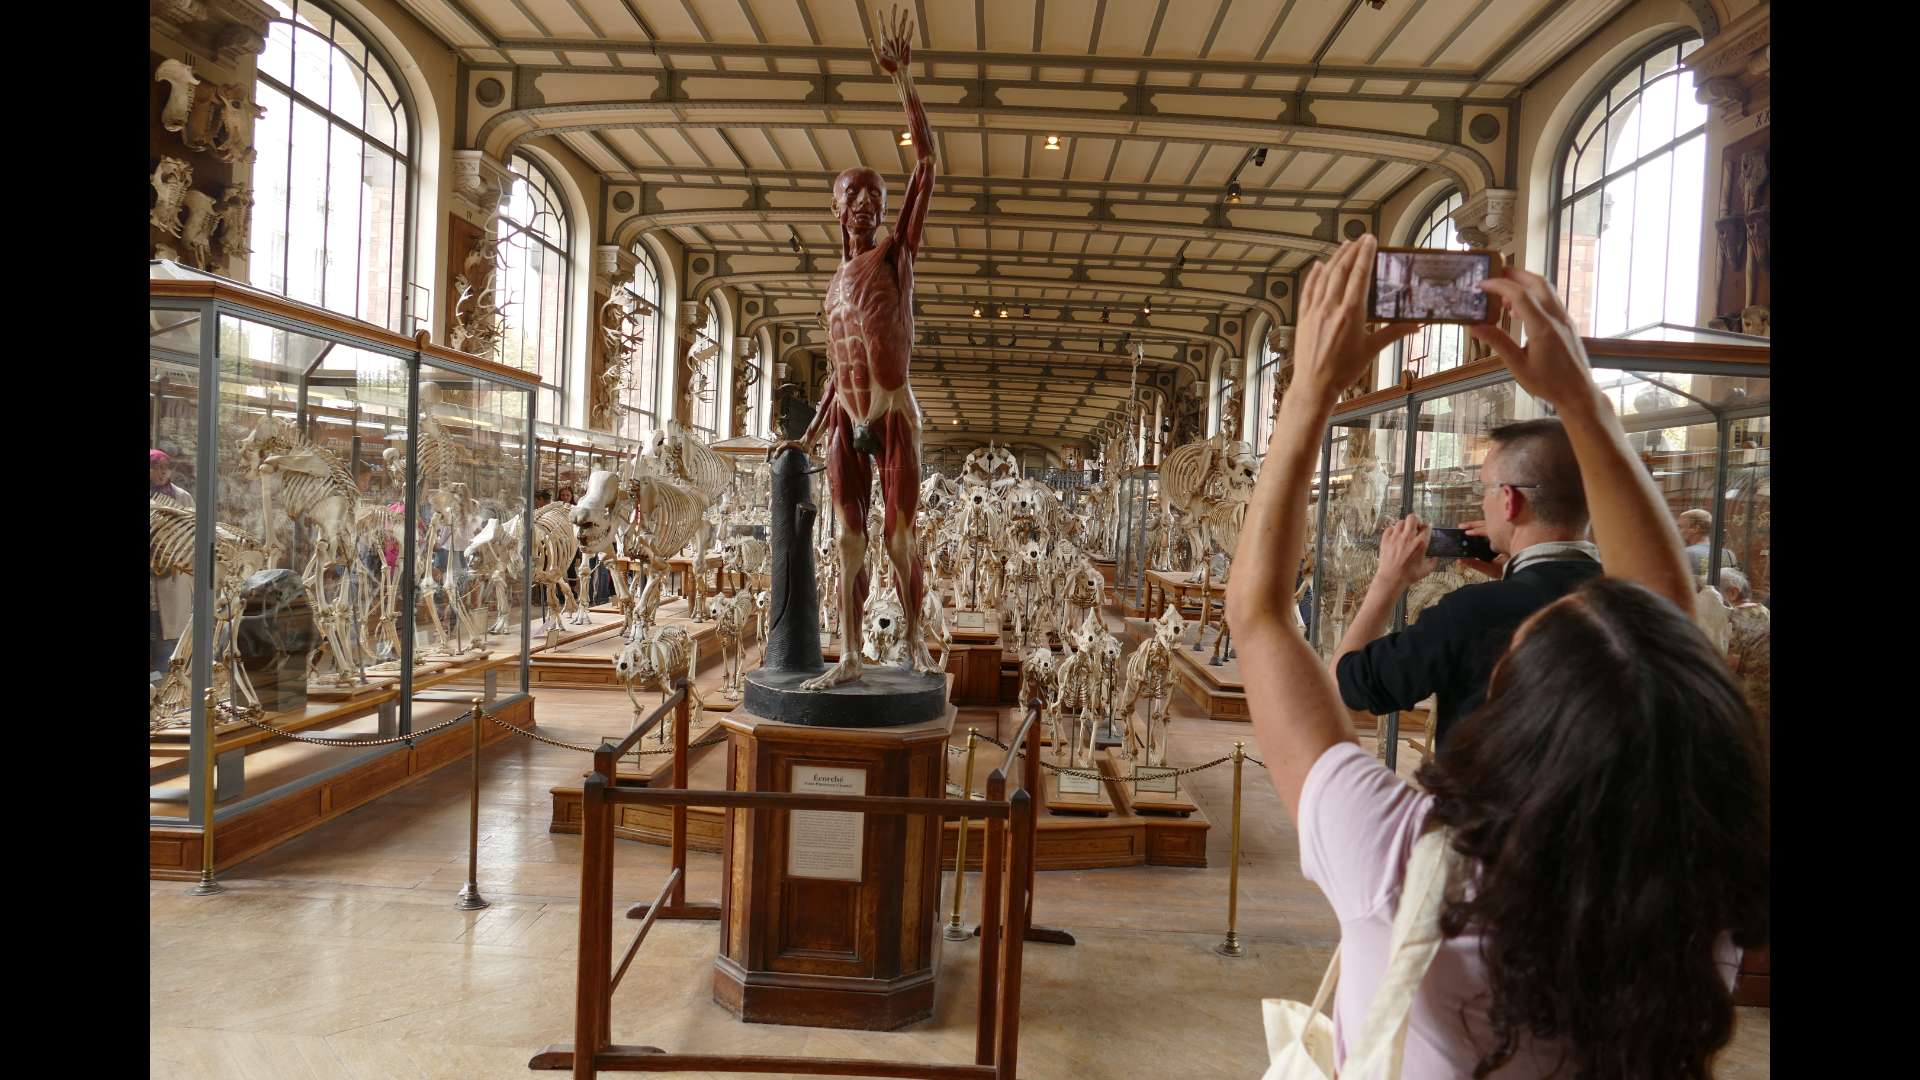 The écorché sculpted in 1758 by Jean-Pancrace Chastel, originally intended for the students at the École des Beaux-Arts in Aix-en-Provence, came as a late addition in the entrance hall of the Gallery of Comparative Anatomy at the National Museum of Natural History in Paris. Photo copyright: Sophie Cattoire